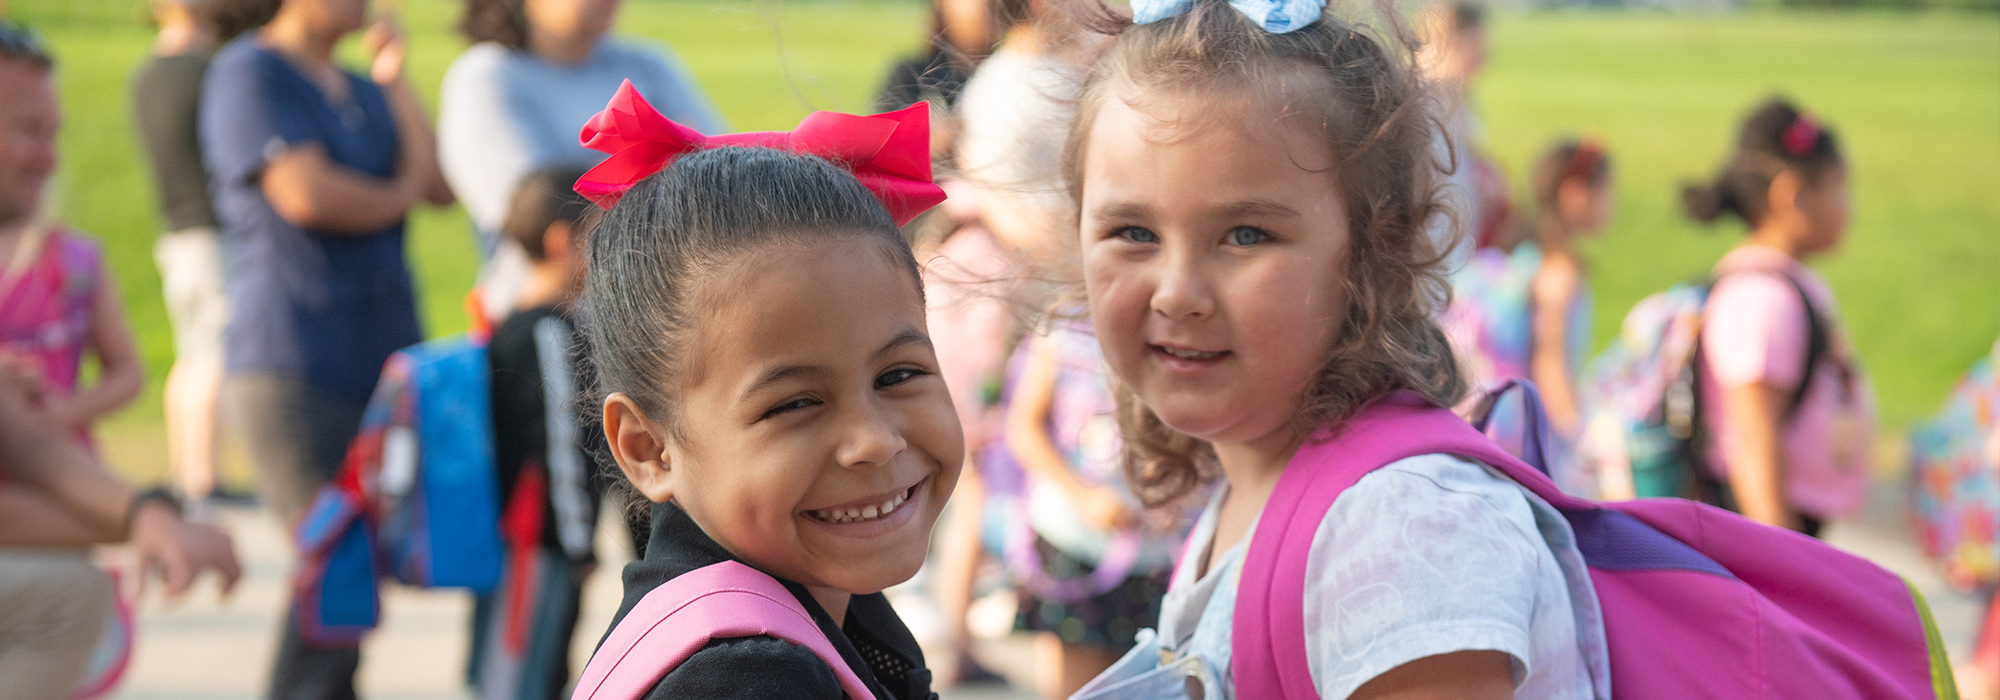 Two girls with backpacks on first day of school